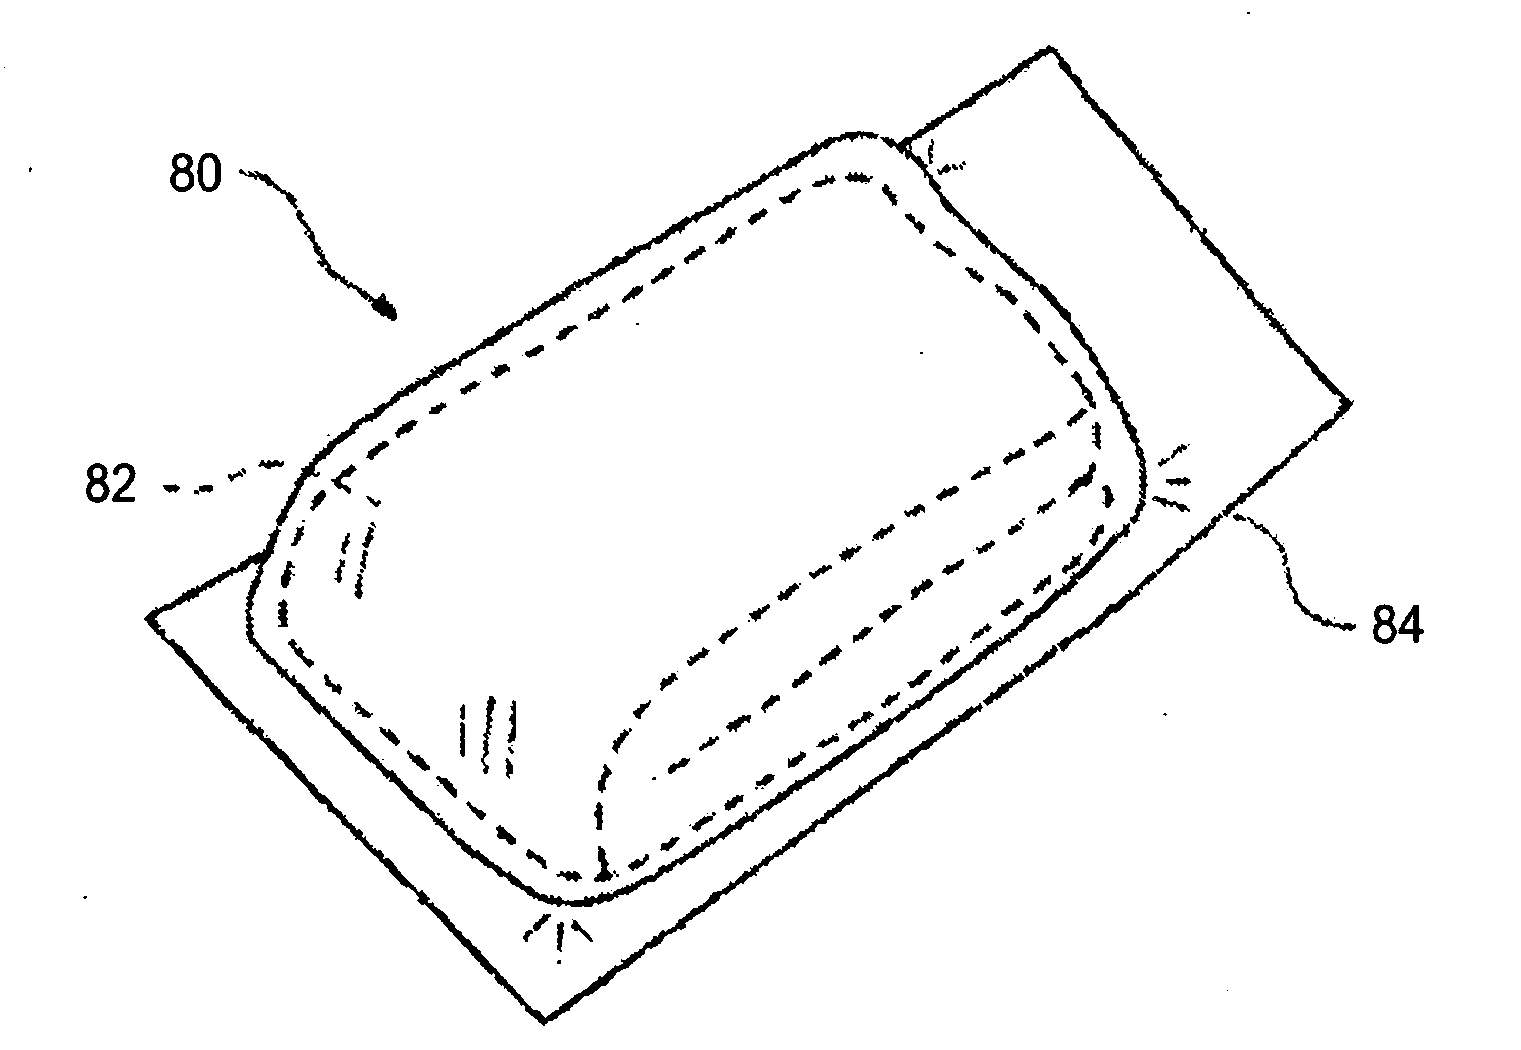 Compact and portable individually packaged training pants for use in intimate absorption of body fluid